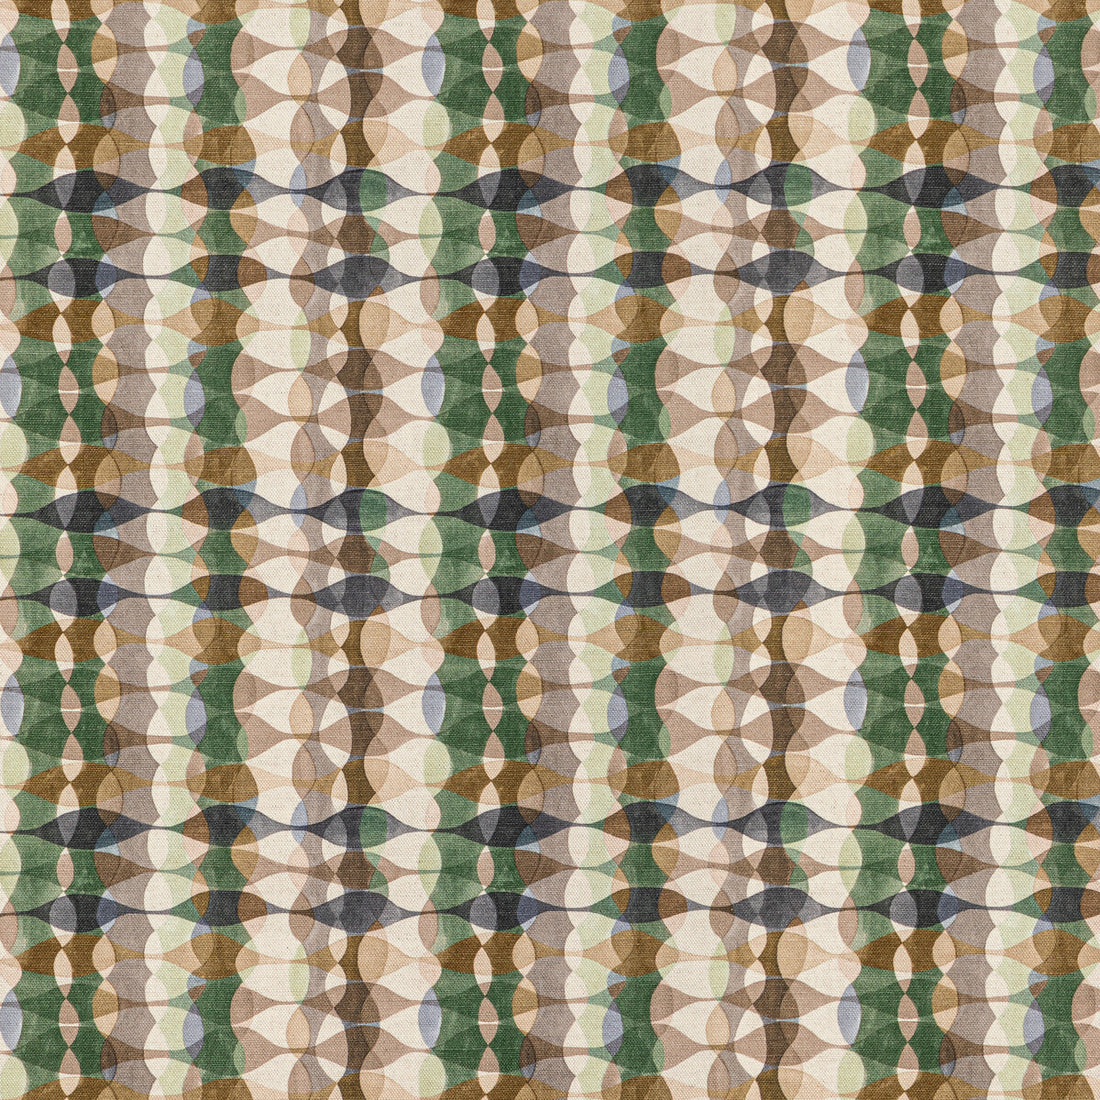 Overtone Print fabric in spruce color - pattern GWF-3775.630.0 - by Lee Jofa Modern in the Rhapsody collection